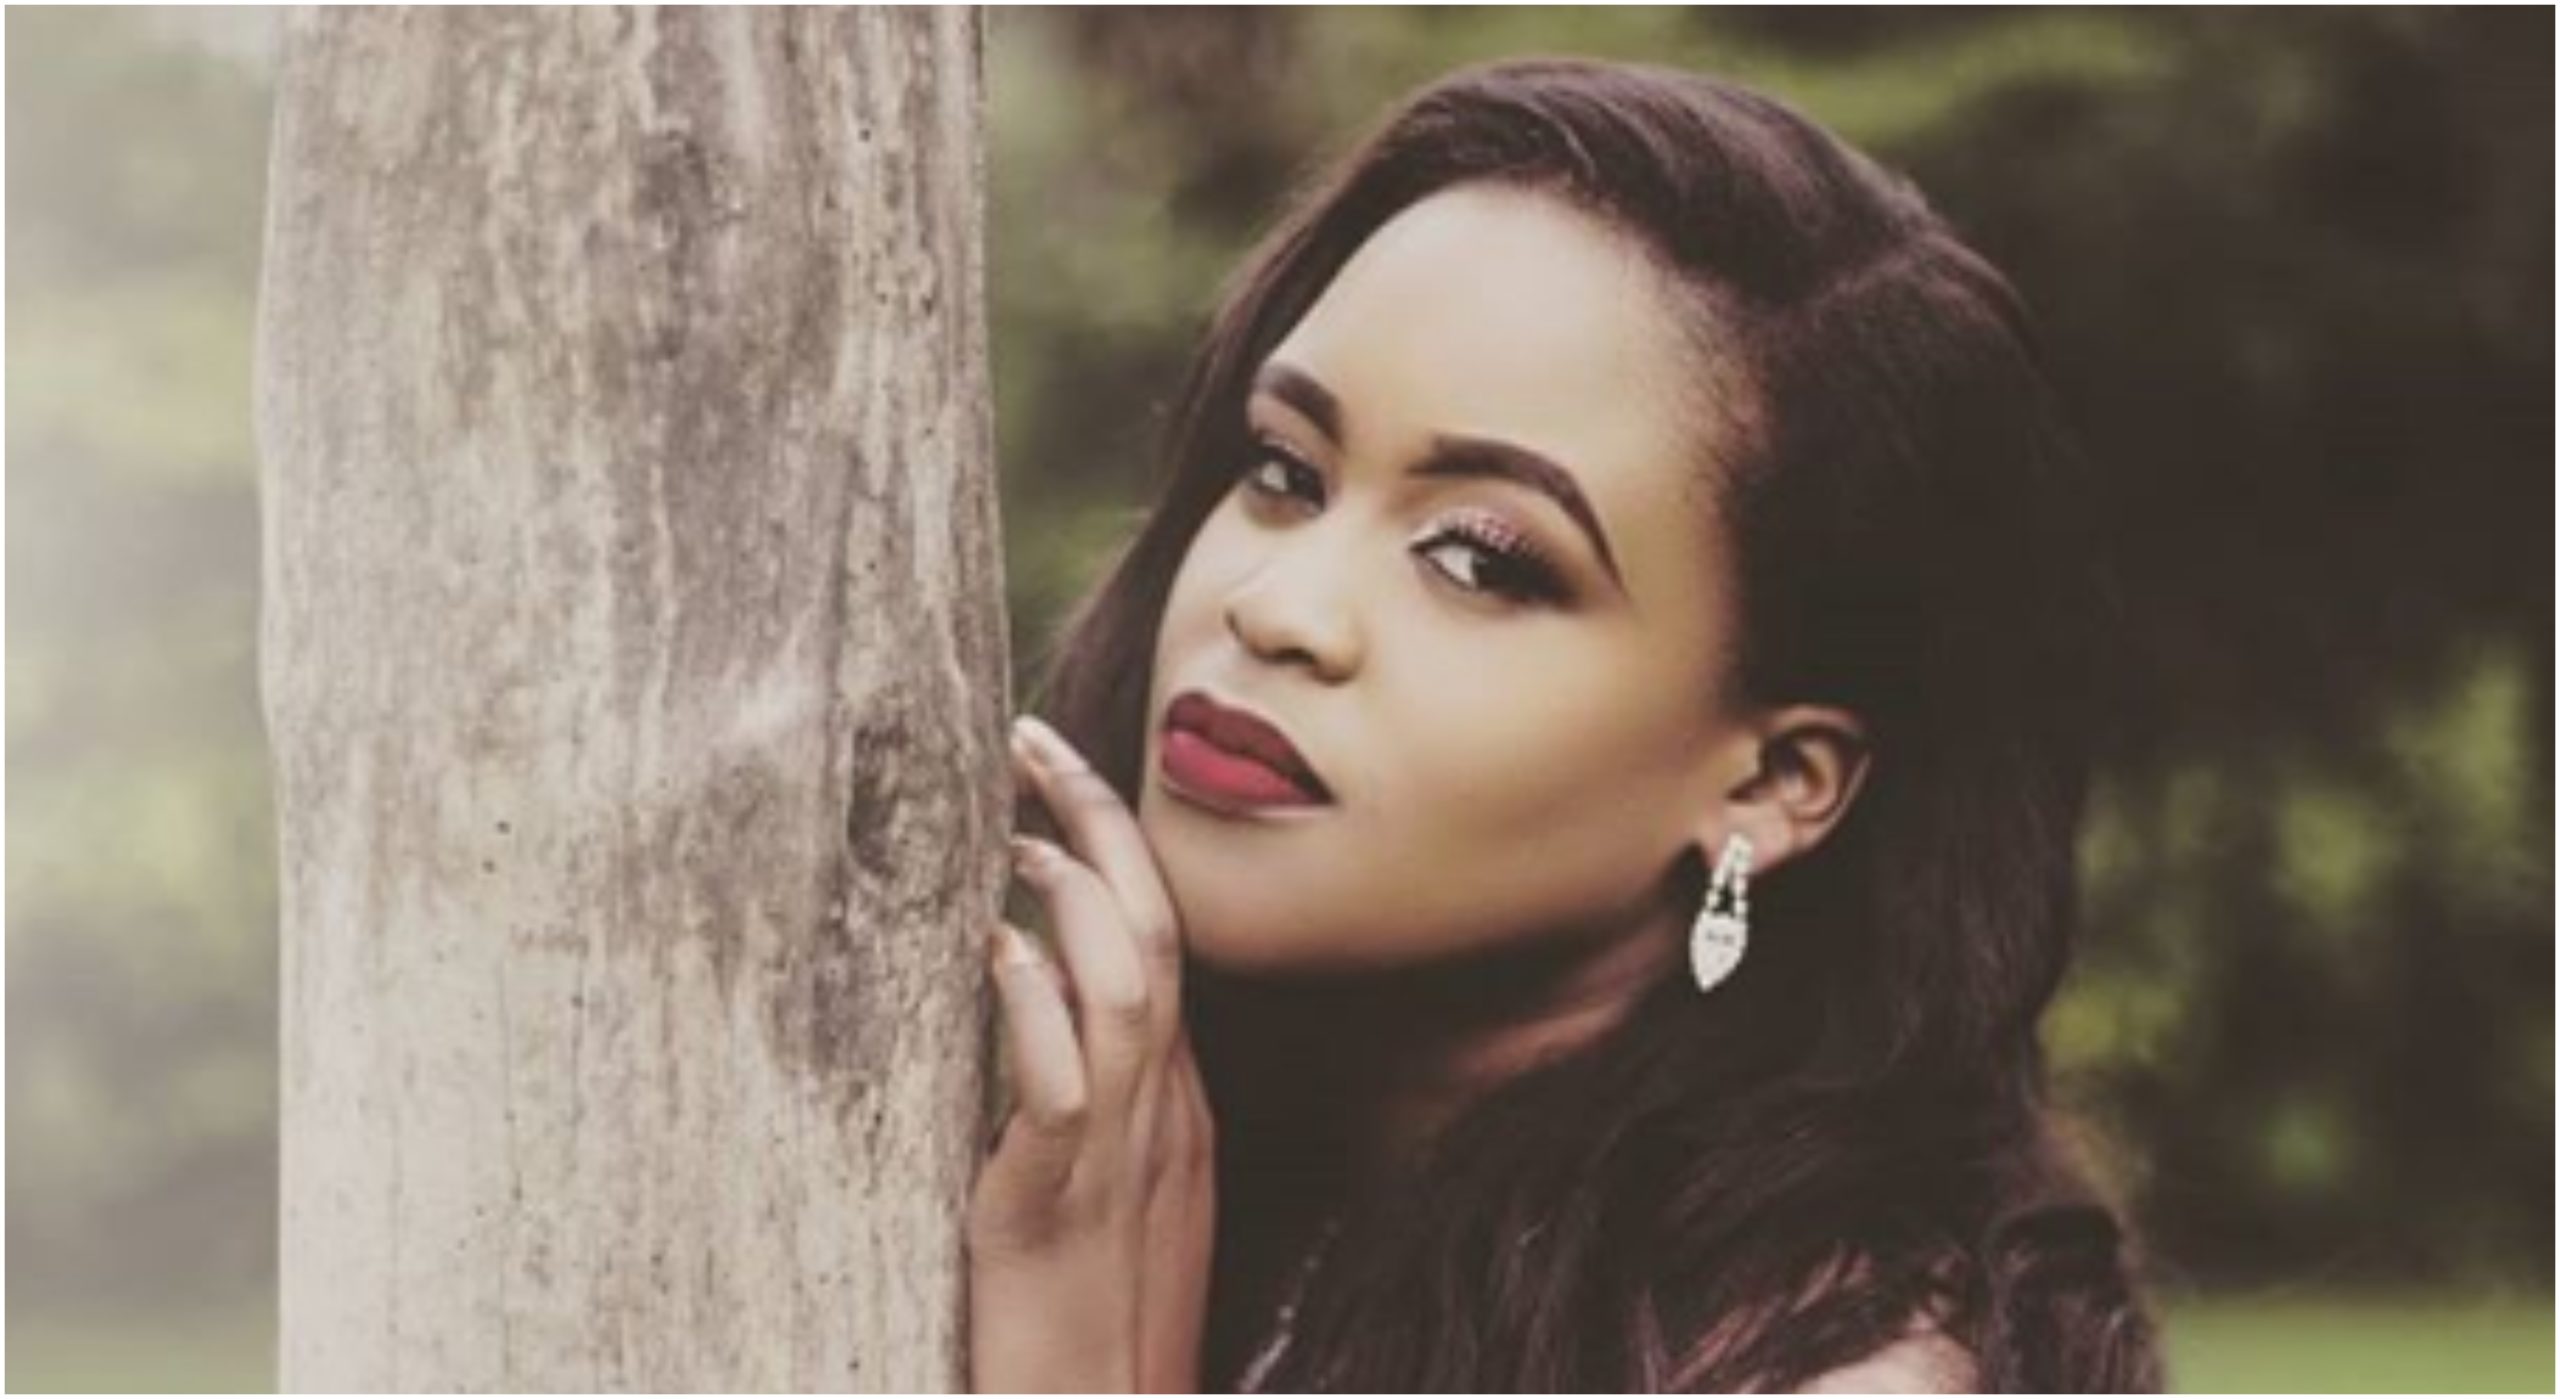 “I gave up everything for a man who later betrayed me,” Kamene Goro’s regrets after getting married aged 23